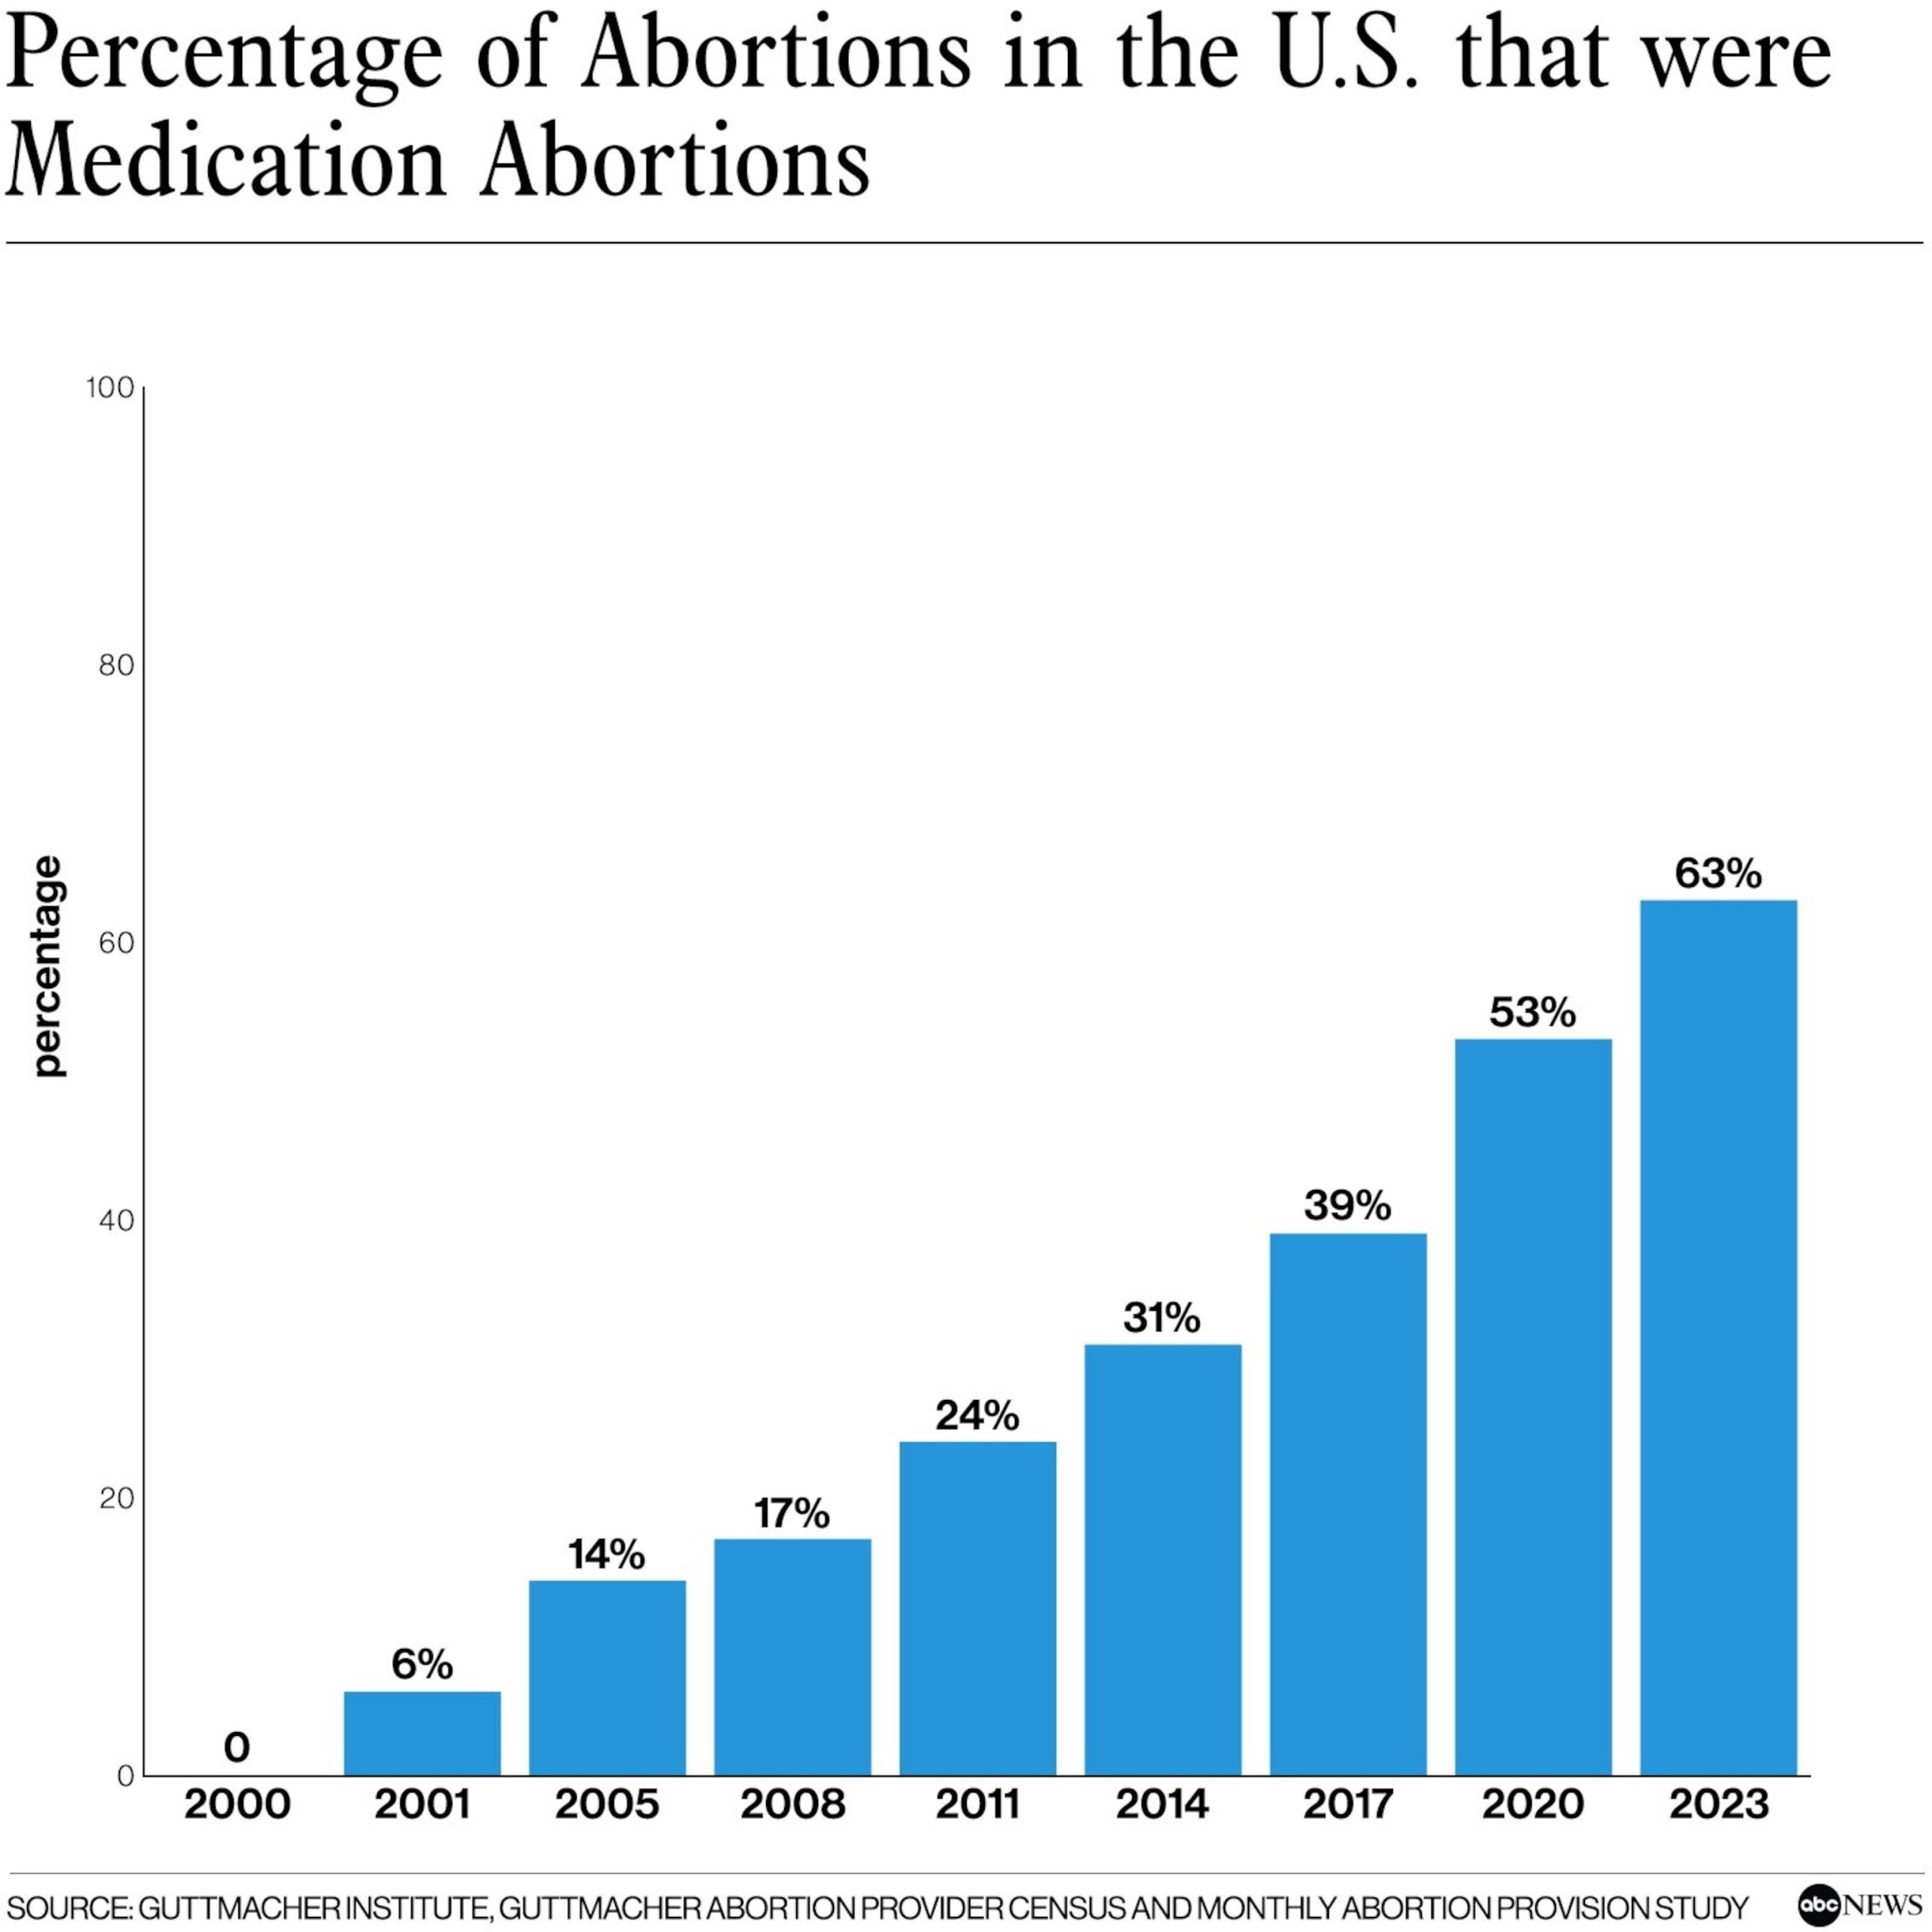 Study finds that medication abortion made up 63% of US abortions in 2023